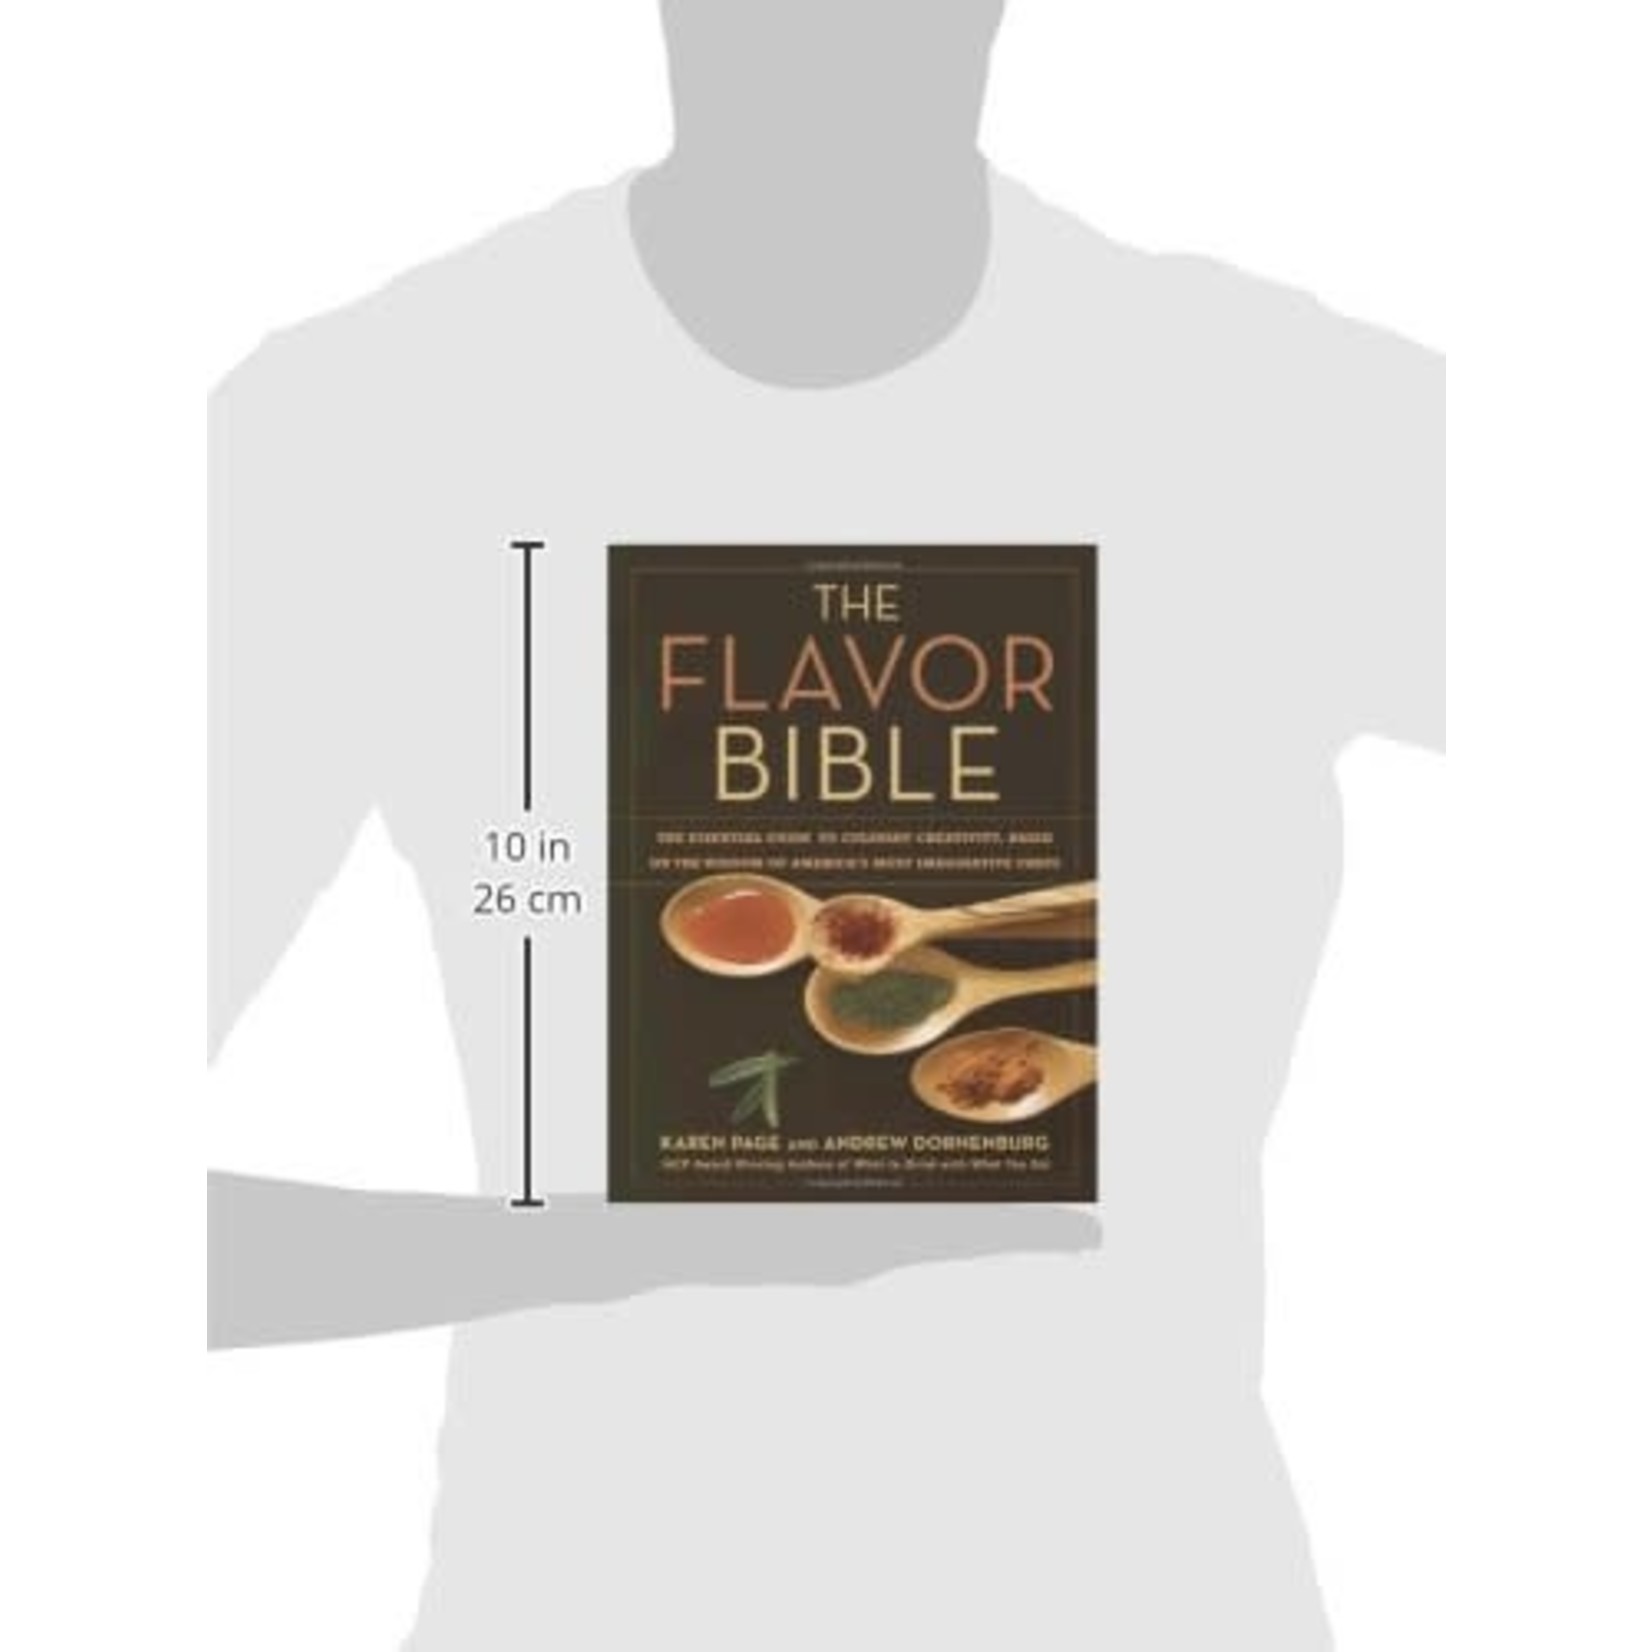 The Flavor Bible